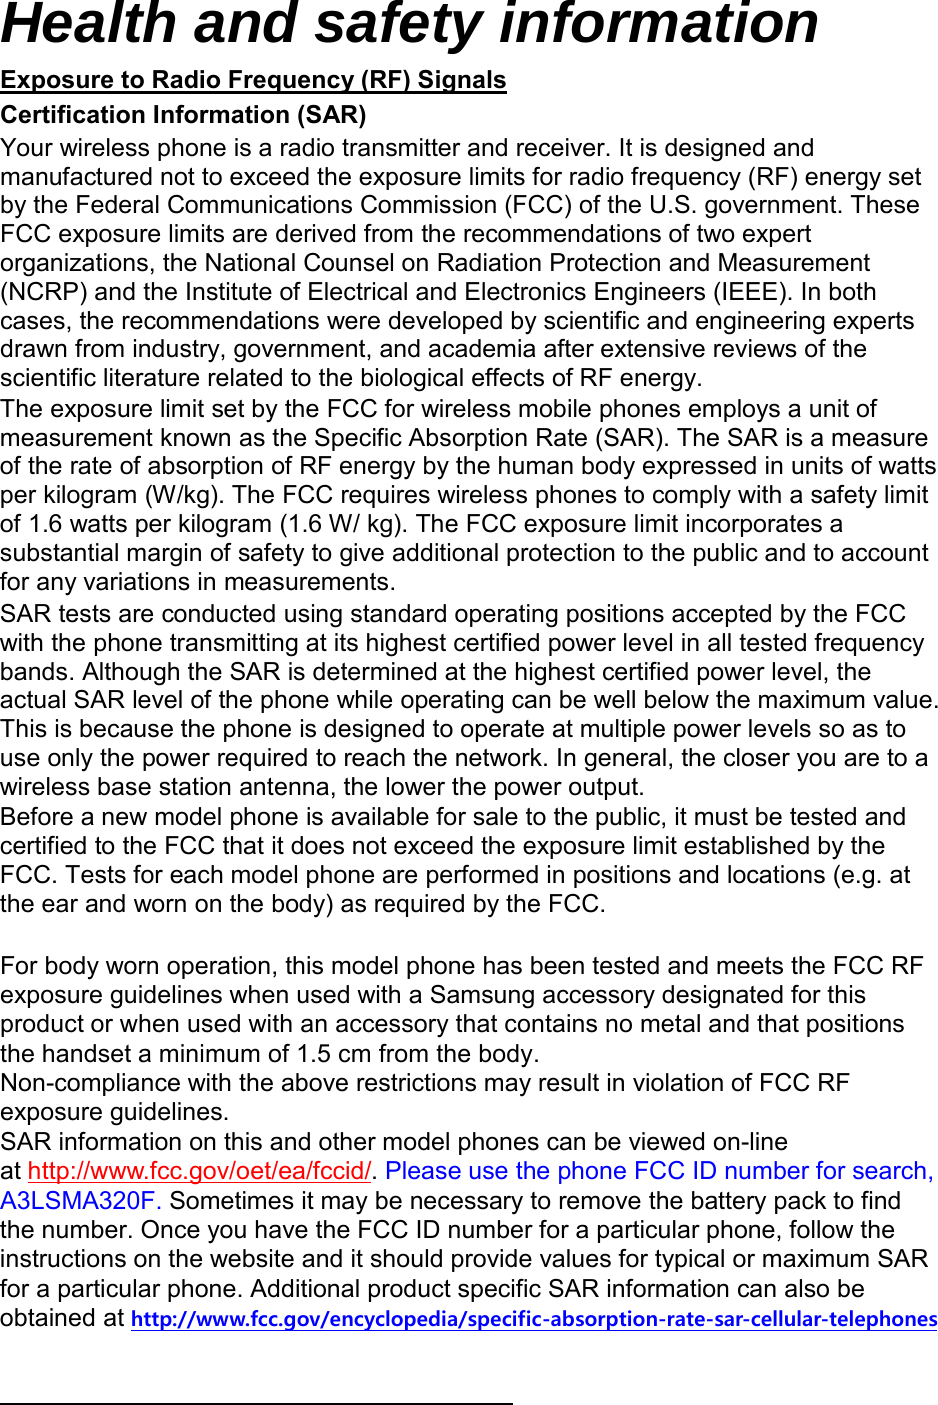 Health and safety information Certification Information (SAR) Exposure to Radio Frequency (RF) Signals Your wireless phone is a radio transmitter and receiver. It is designed and manufactured not to exceed the exposure limits for radio frequency (RF) energy set by the Federal Communications Commission (FCC) of the U.S. government. These FCC exposure limits are derived from the recommendations of two expert organizations, the National Counsel on Radiation Protection and Measurement (NCRP) and the Institute of Electrical and Electronics Engineers (IEEE). In both cases, the recommendations were developed by scientific and engineering experts drawn from industry, government, and academia after extensive reviews of the scientific literature related to the biological effects of RF energy. The exposure limit set by the FCC for wireless mobile phones employs a unit of measurement known as the Specific Absorption Rate (SAR). The SAR is a measure of the rate of absorption of RF energy by the human body expressed in units of watts per kilogram (W/kg). The FCC requires wireless phones to comply with a safety limit of 1.6 watts per kilogram (1.6 W/ kg). The FCC exposure limit incorporates a substantial margin of safety to give additional protection to the public and to account for any variations in measurements. SAR tests are conducted using standard operating positions accepted by the FCC with the phone transmitting at its highest certified power level in all tested frequency bands. Although the SAR is determined at the highest certified power level, the actual SAR level of the phone while operating can be well below the maximum value. This is because the phone is designed to operate at multiple power levels so as to use only the power required to reach the network. In general, the closer you are to a wireless base station antenna, the lower the power output. Before a new model phone is available for sale to the public, it must be tested and certified to the FCC that it does not exceed the exposure limit established by the FCC. Tests for each model phone are performed in positions and locations (e.g. at the ear and worn on the body) as required by the FCC.     For body worn operation, this model phone has been tested and meets the FCC RF exposure guidelines when used with a Samsung accessory designated for this product or when used with an accessory that contains no metal and that positions the handset a minimum of 1.5 cm from the body.  Non-compliance with the above restrictions may result in violation of FCC RF exposure guidelines. SAR information on this and other model phones can be viewed on-line at http://www.fcc.gov/oet/ea/fccid/. Please use the phone FCC ID number for search, A3LSMA320F. Sometimes it may be necessary to remove the battery pack to find the number. Once you have the FCC ID number for a particular phone, follow the instructions on the website and it should provide values for typical or maximum SAR for a particular phone. Additional product specific SAR information can also be obtained at http://www.fcc.gov/encyclopedia/specific-absorption-rate-sar-cellular-telephones